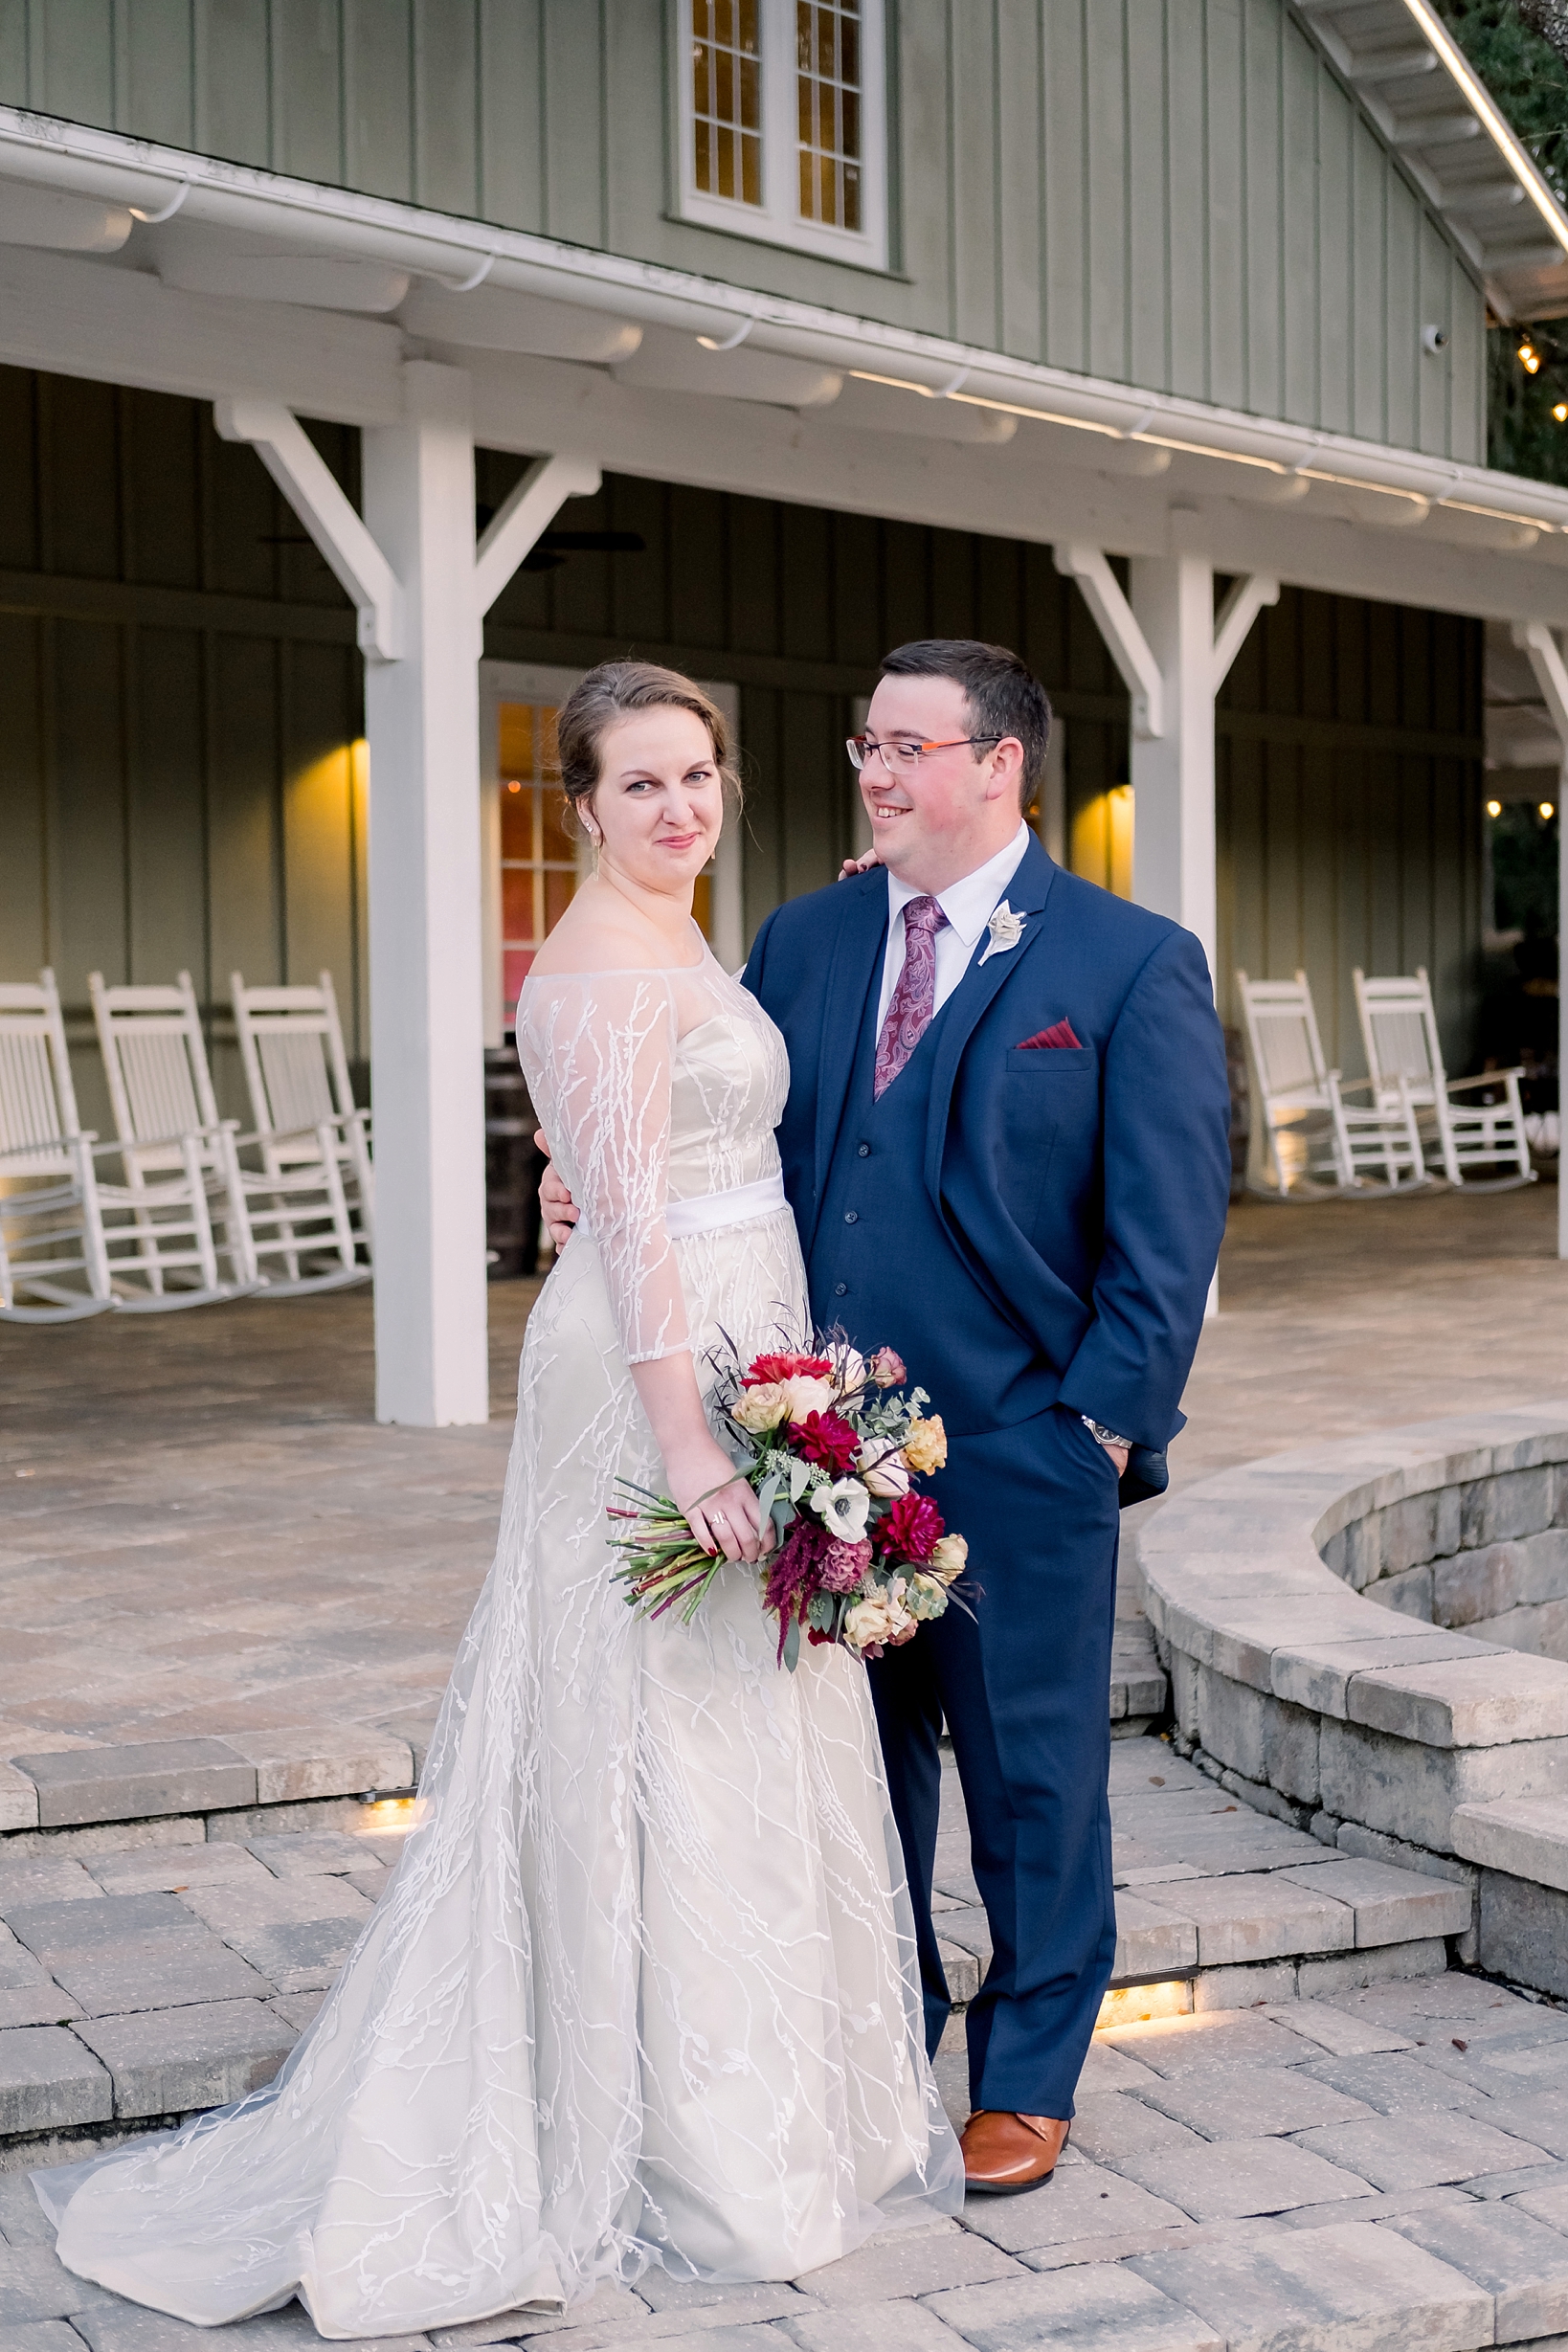 The newlyweds pose in front of the reception barn at the Bowing Oaks Plantation